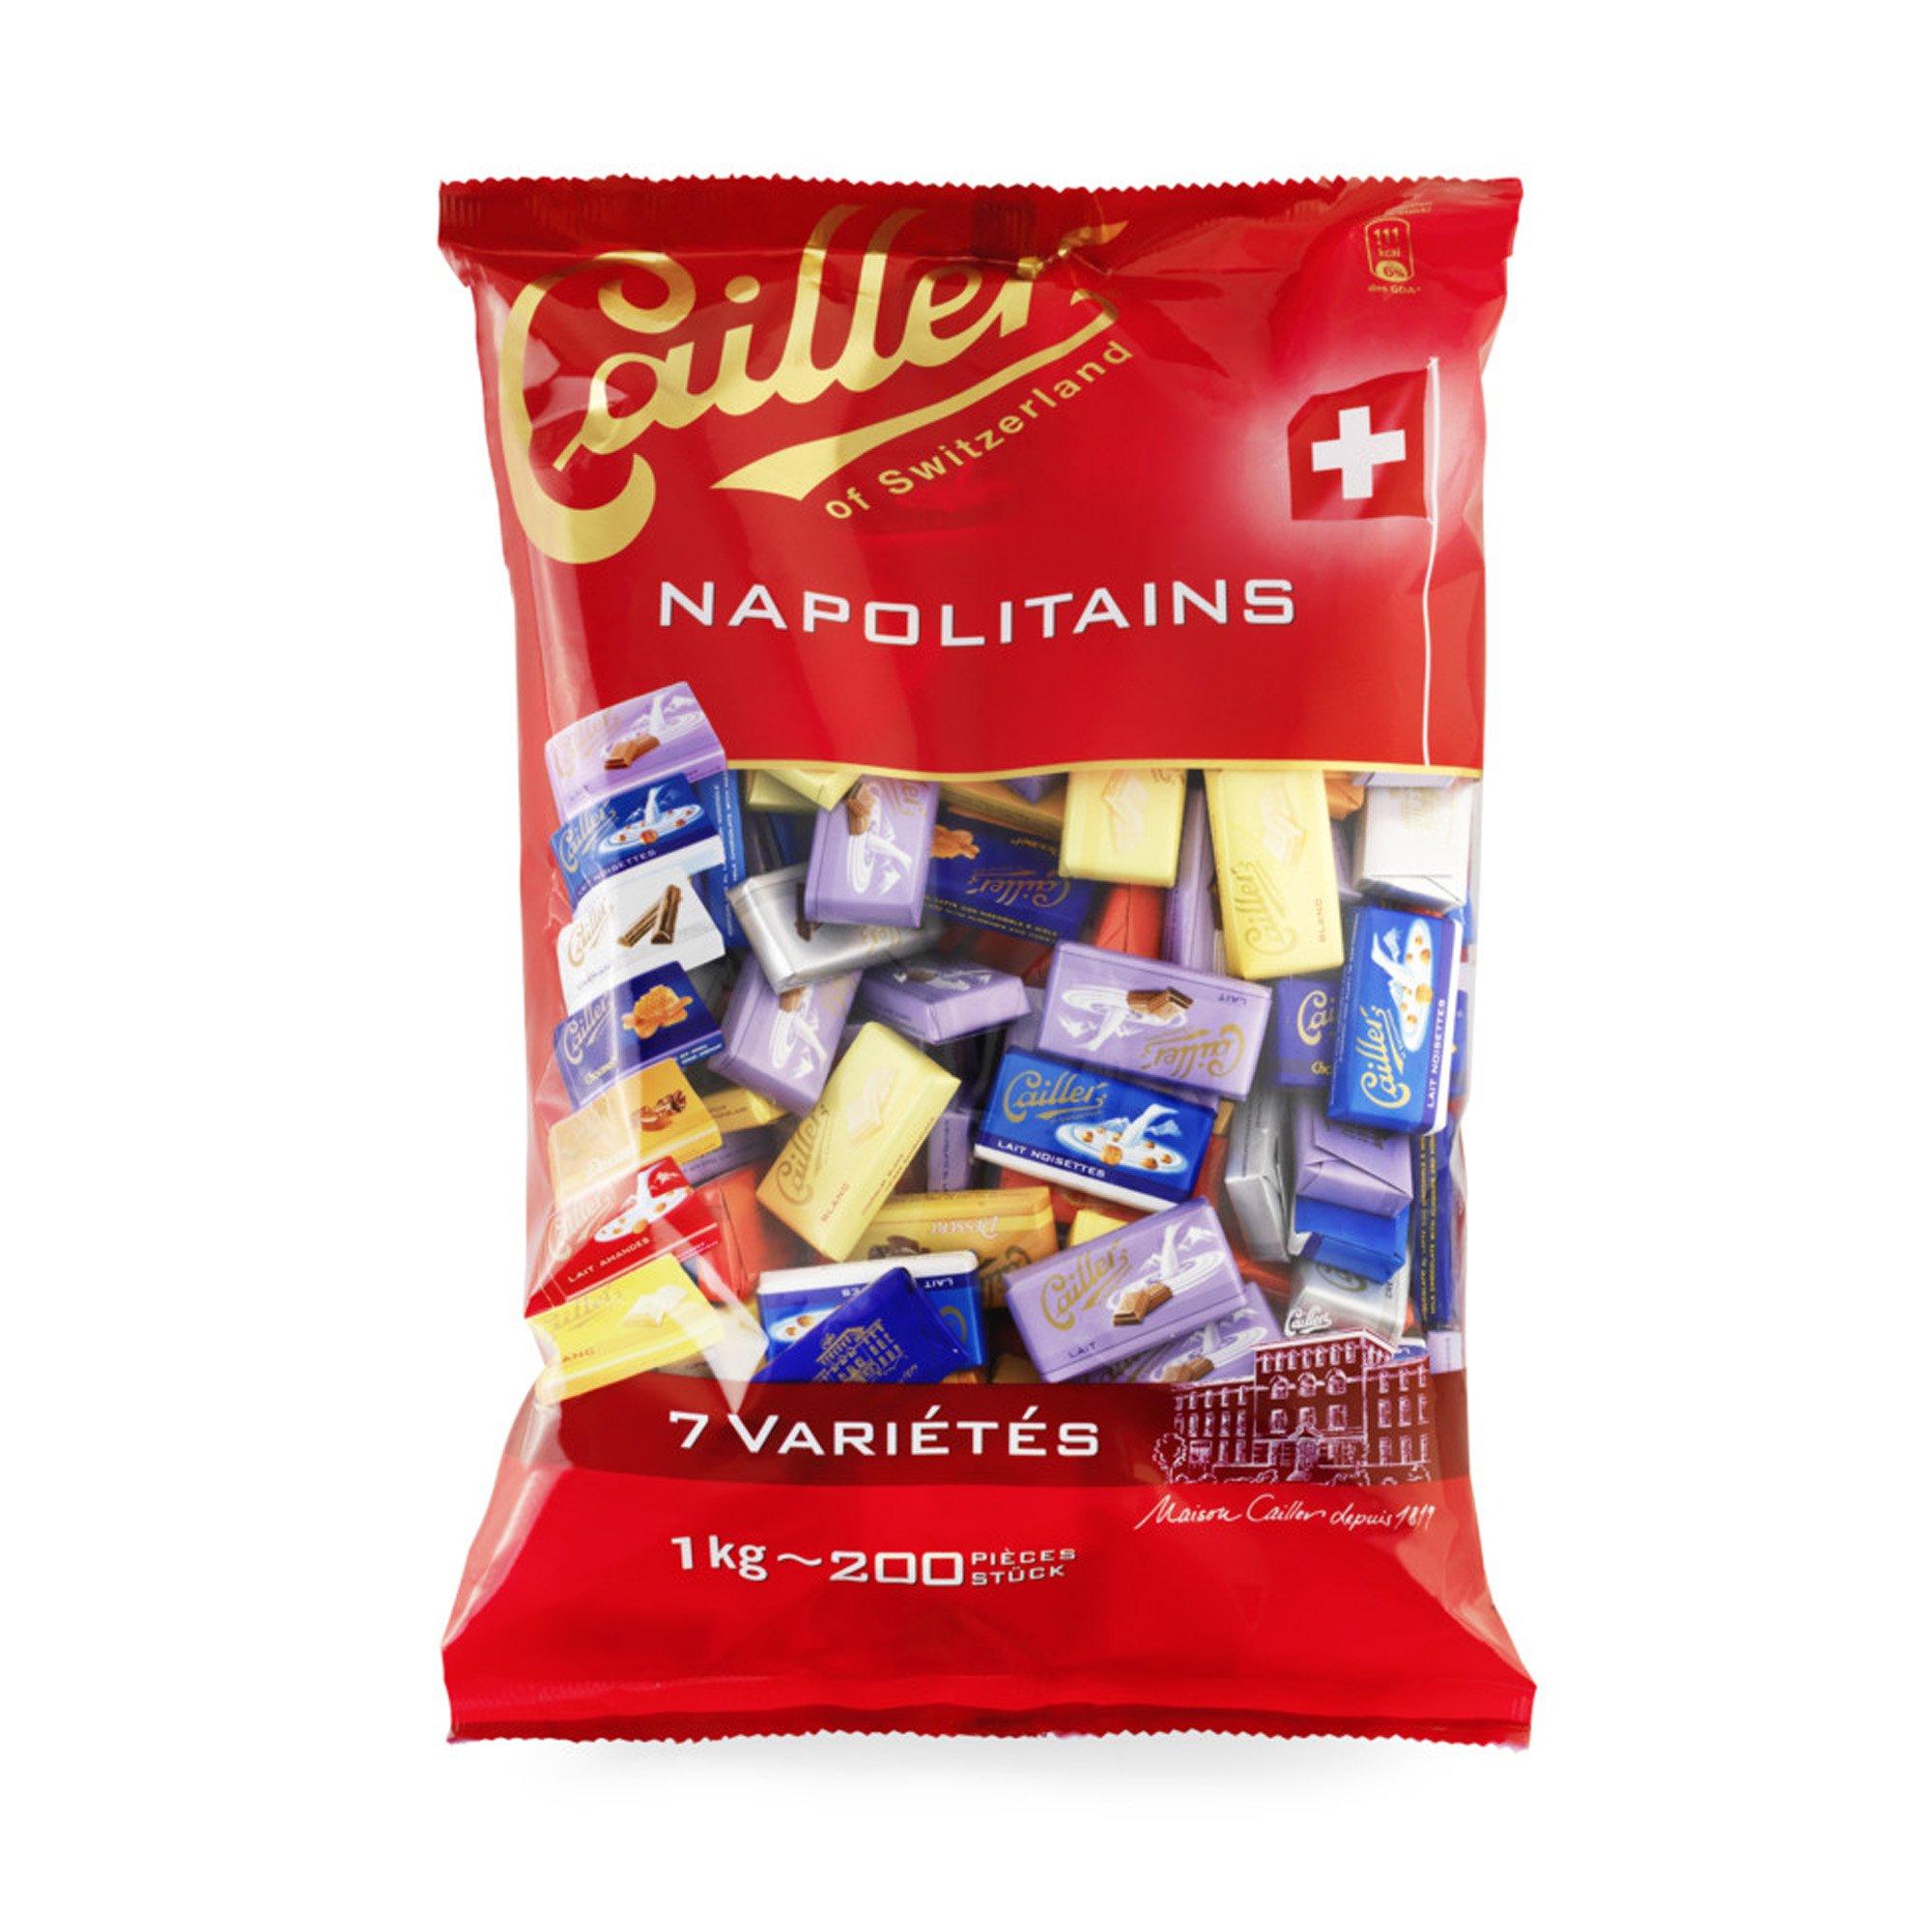 Image of Cailler Napolitains - 1 kg